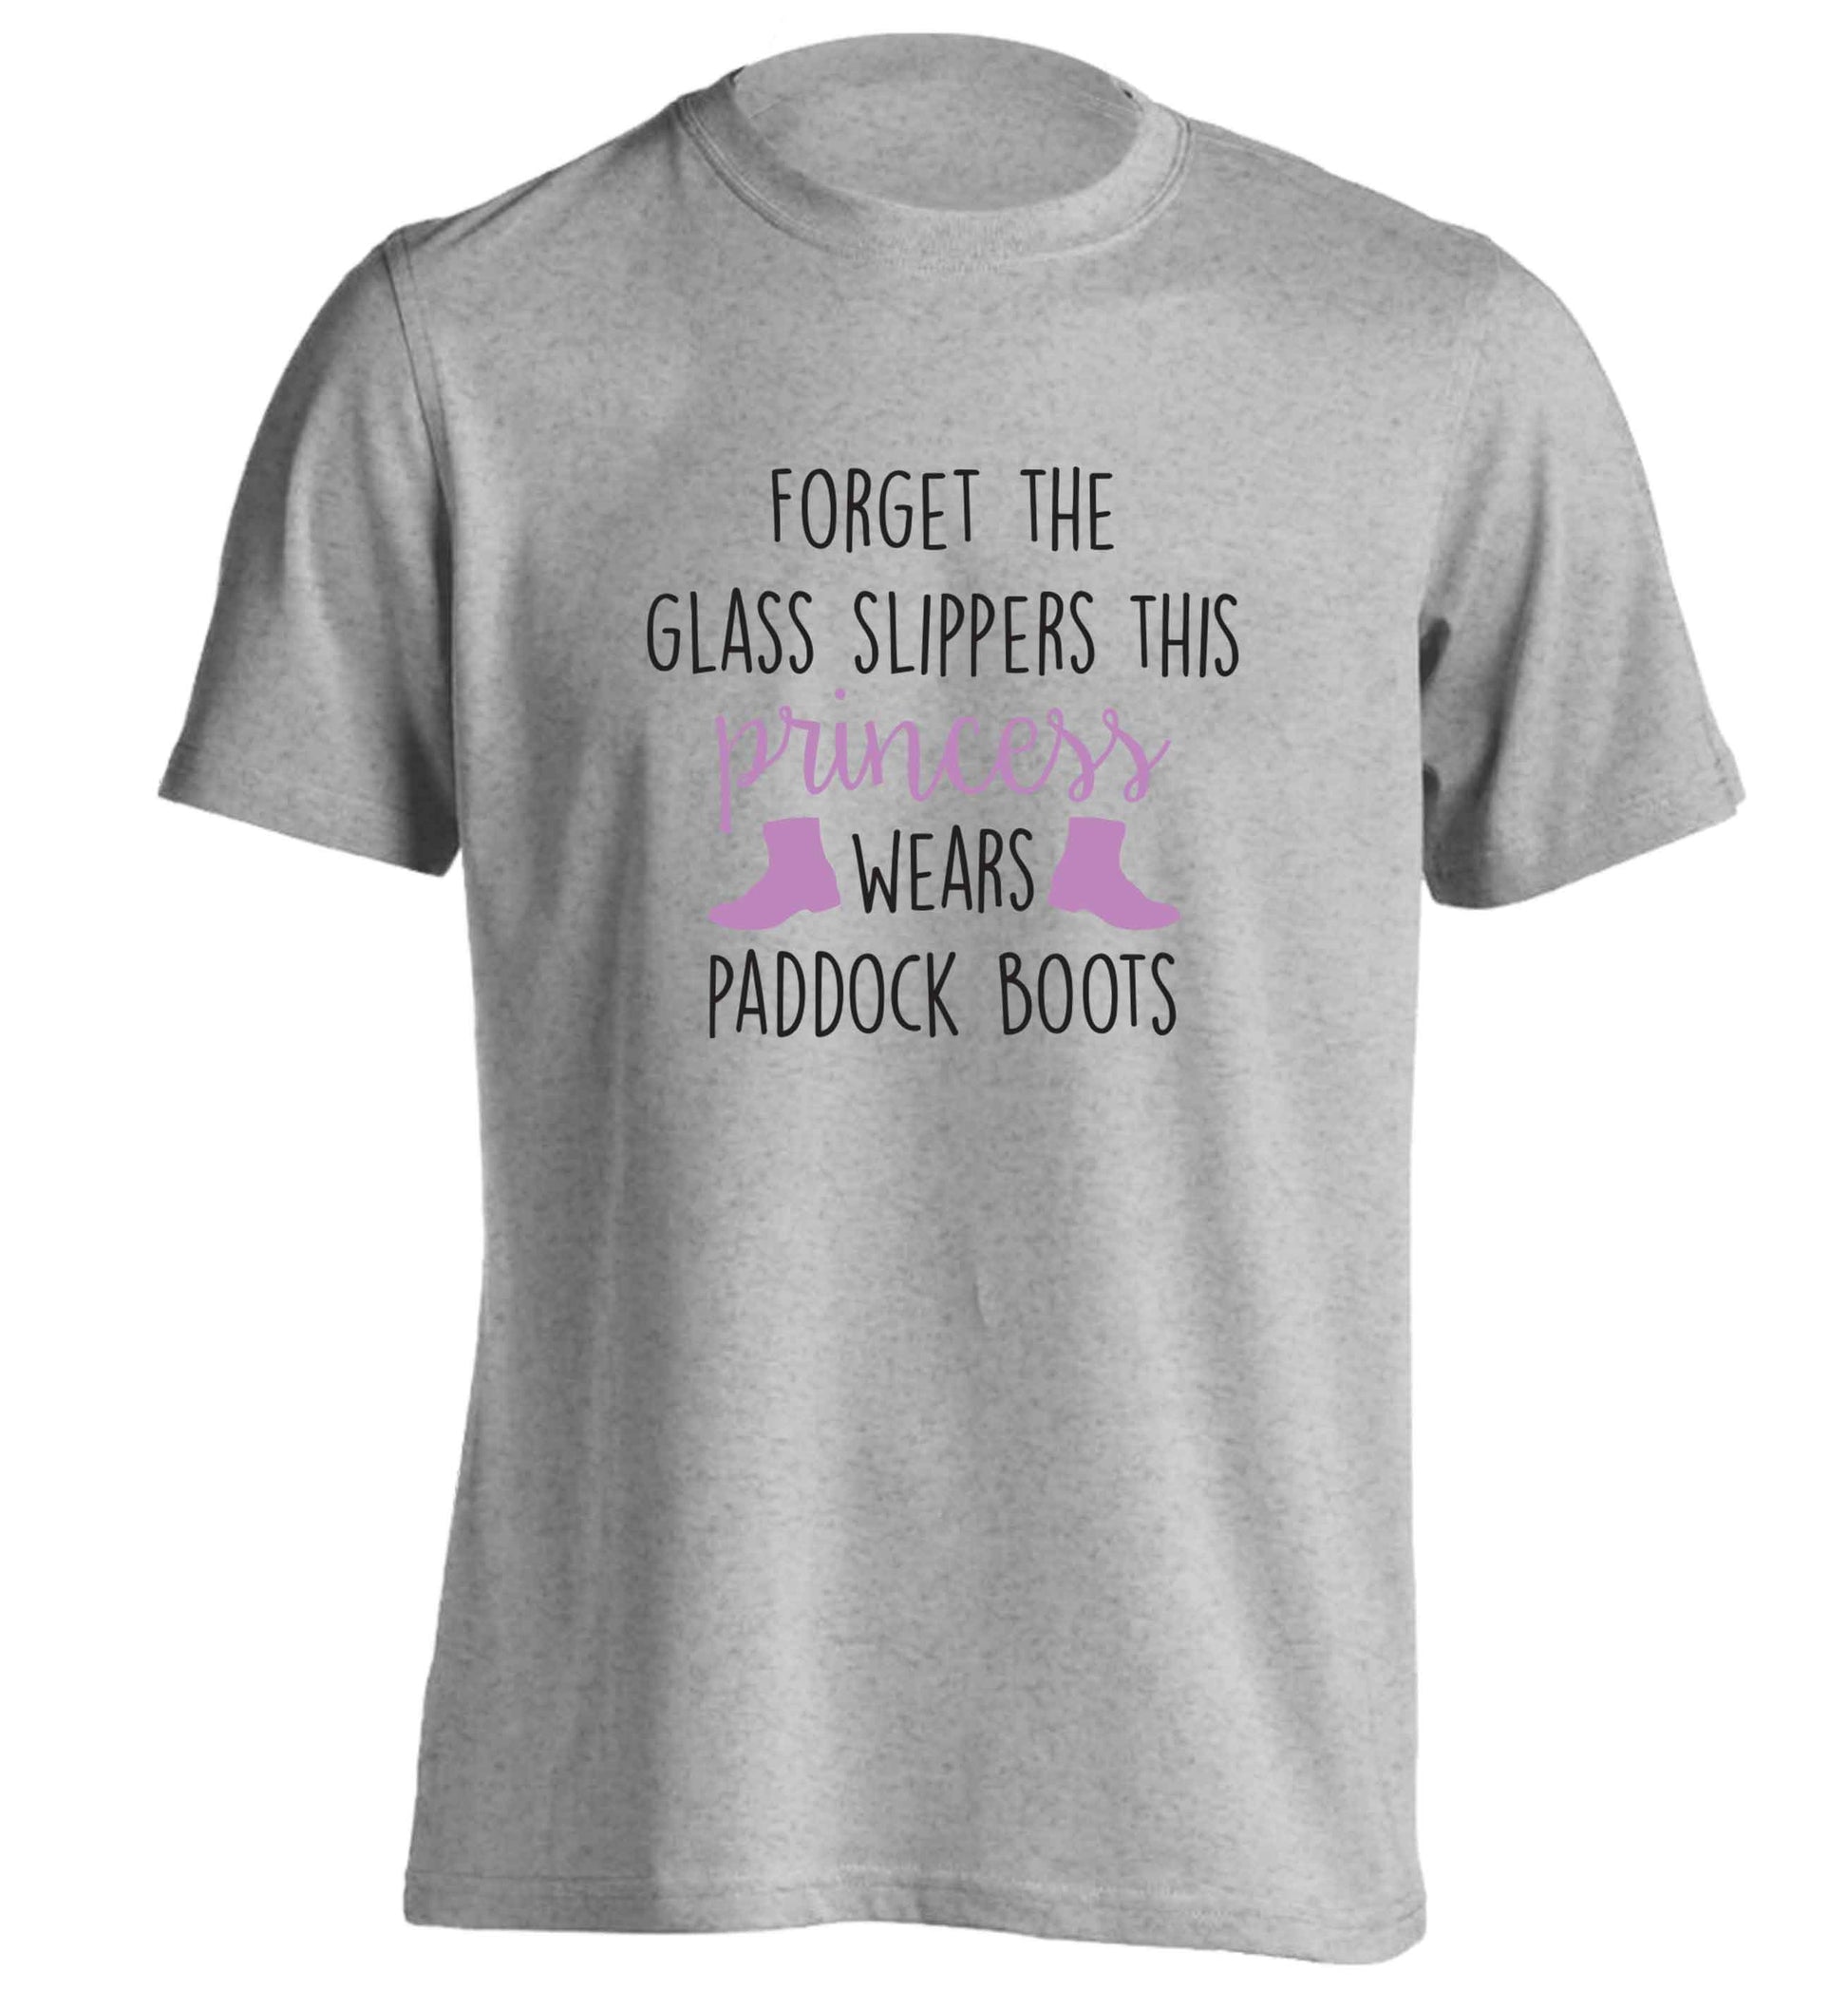 Forget the glass slippers this princess wears paddock boots adults unisex grey Tshirt 2XL